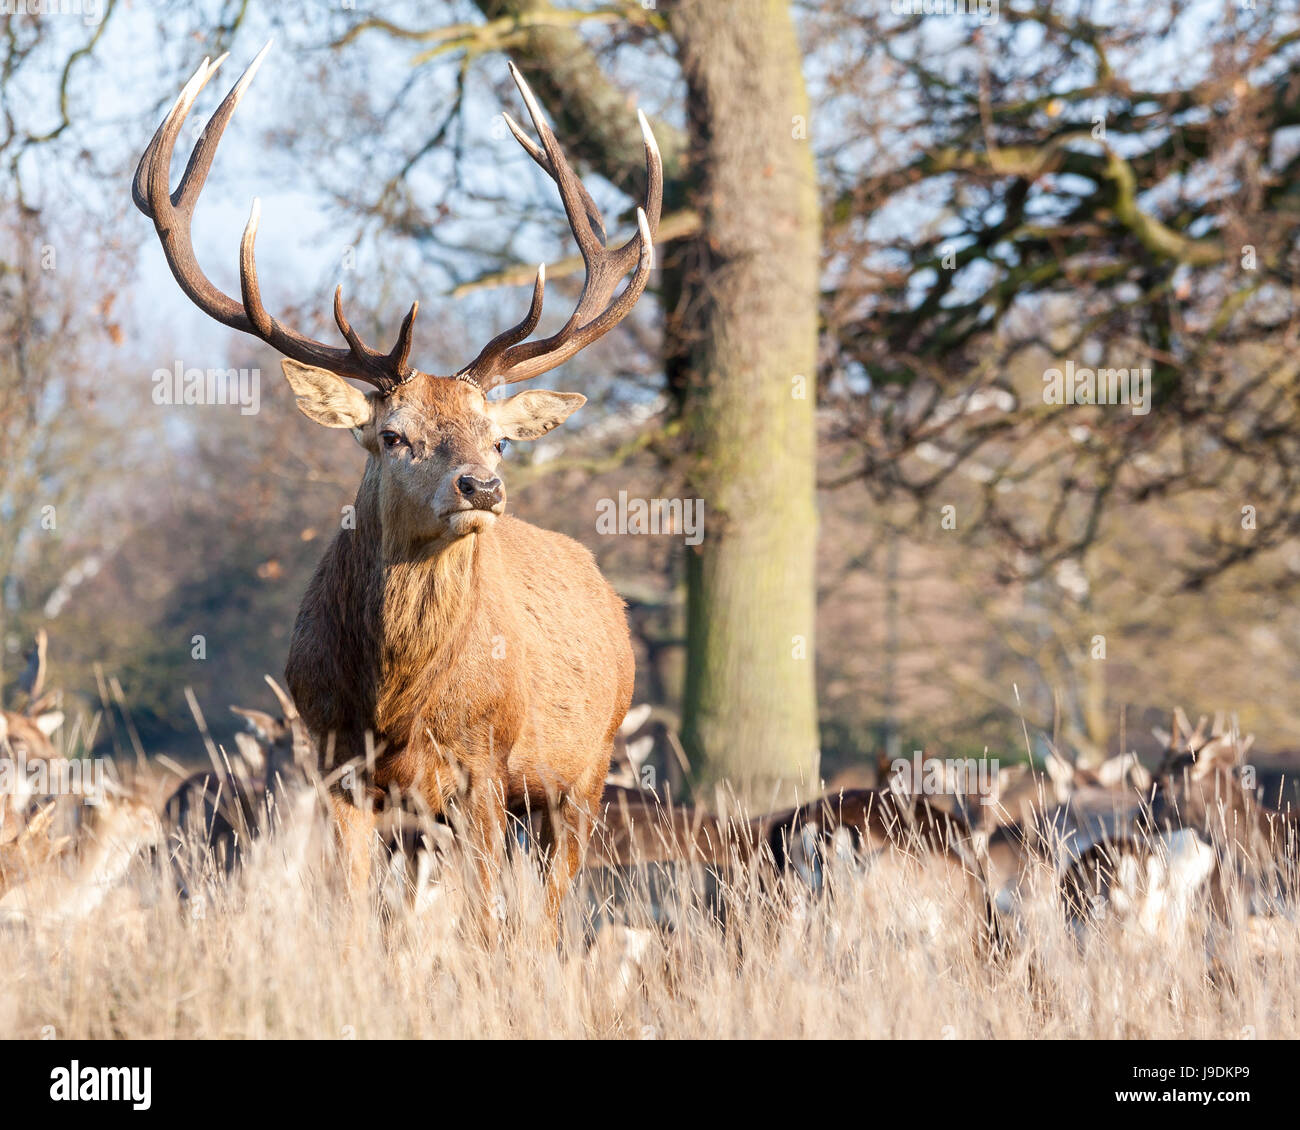 red deer stag in Bushy Park, London Stock Photo